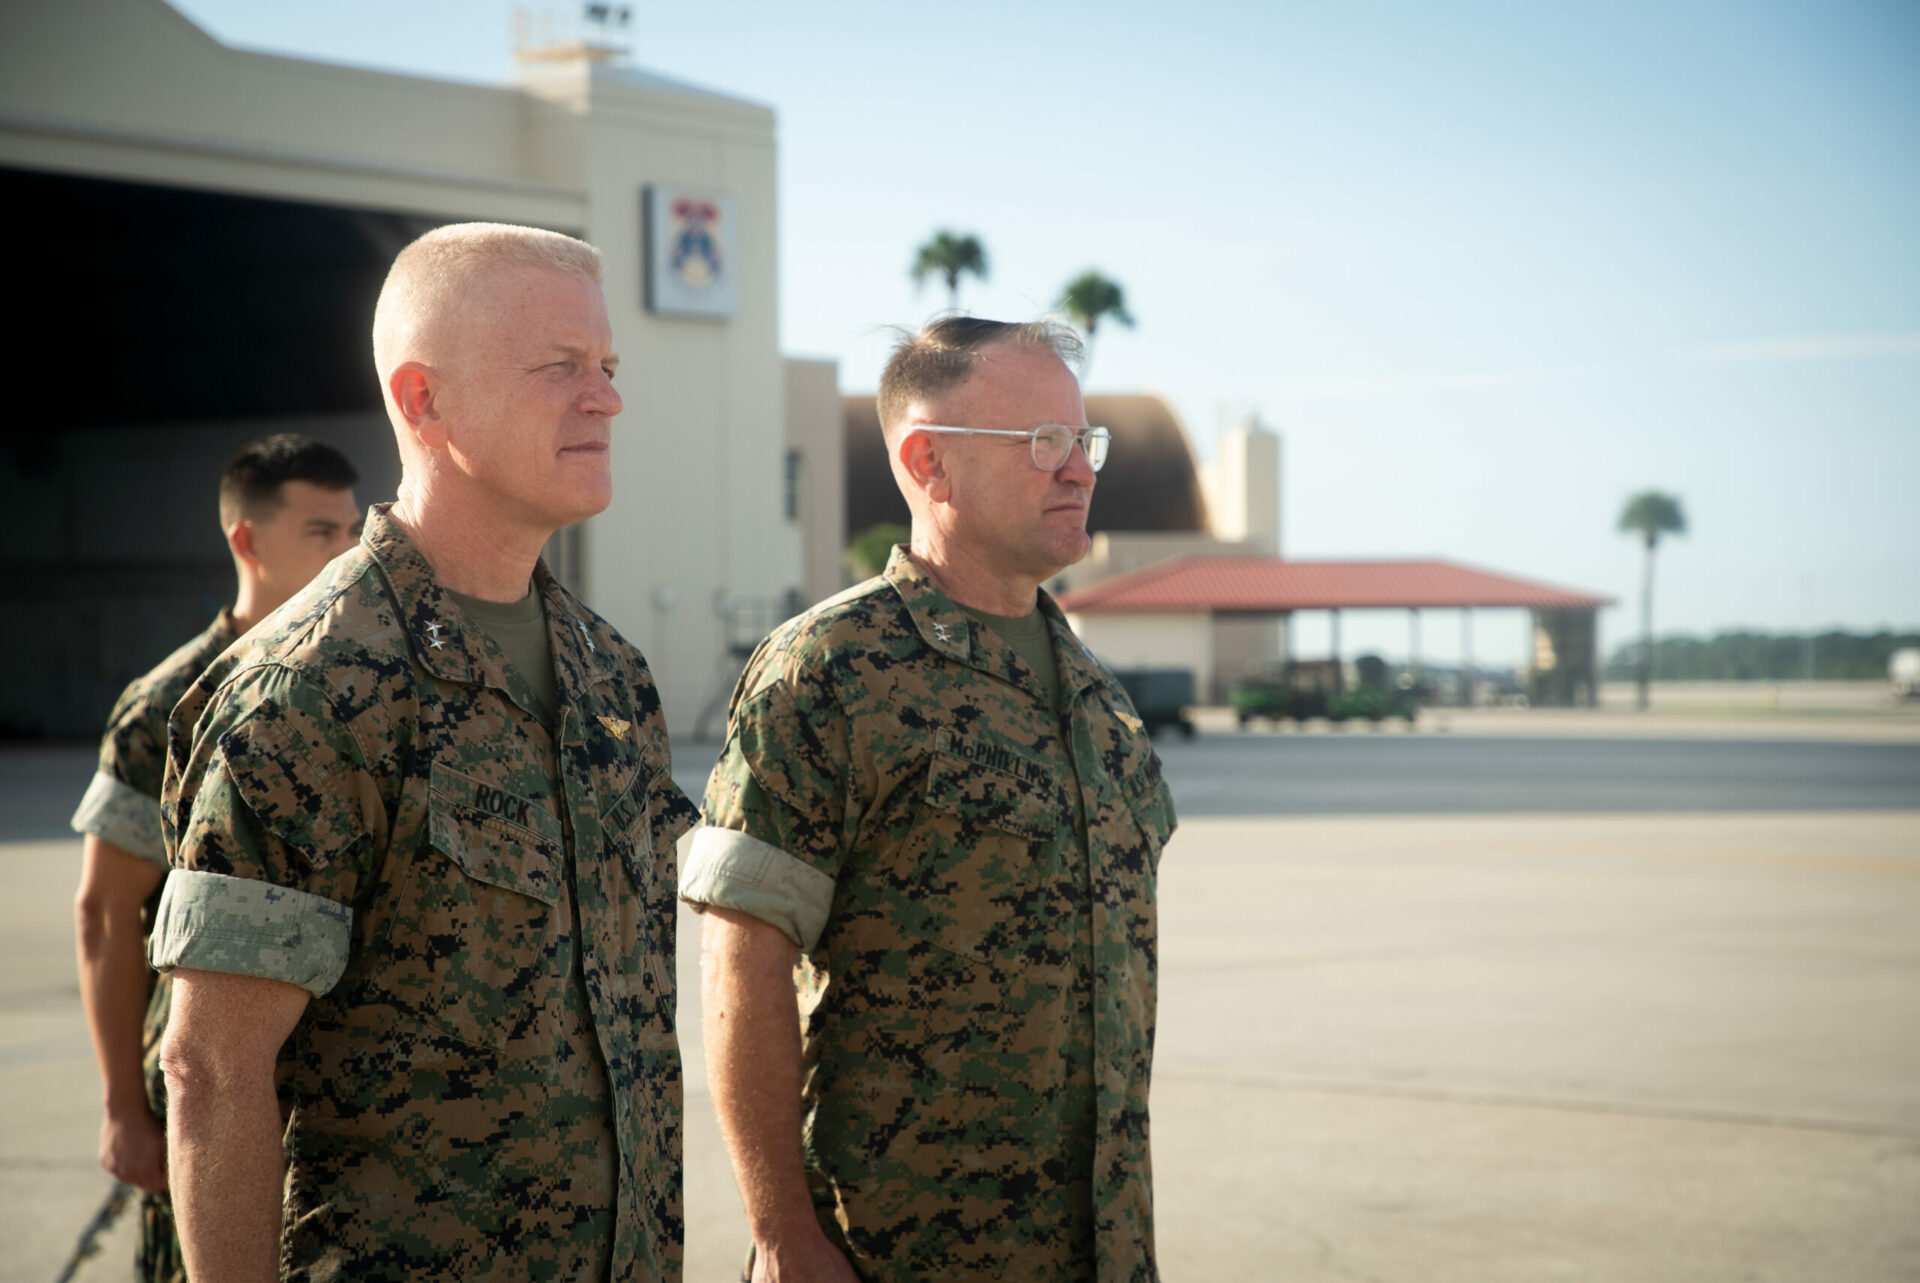 Marine Corps Ball canceled due to 'unforeseen commitments'